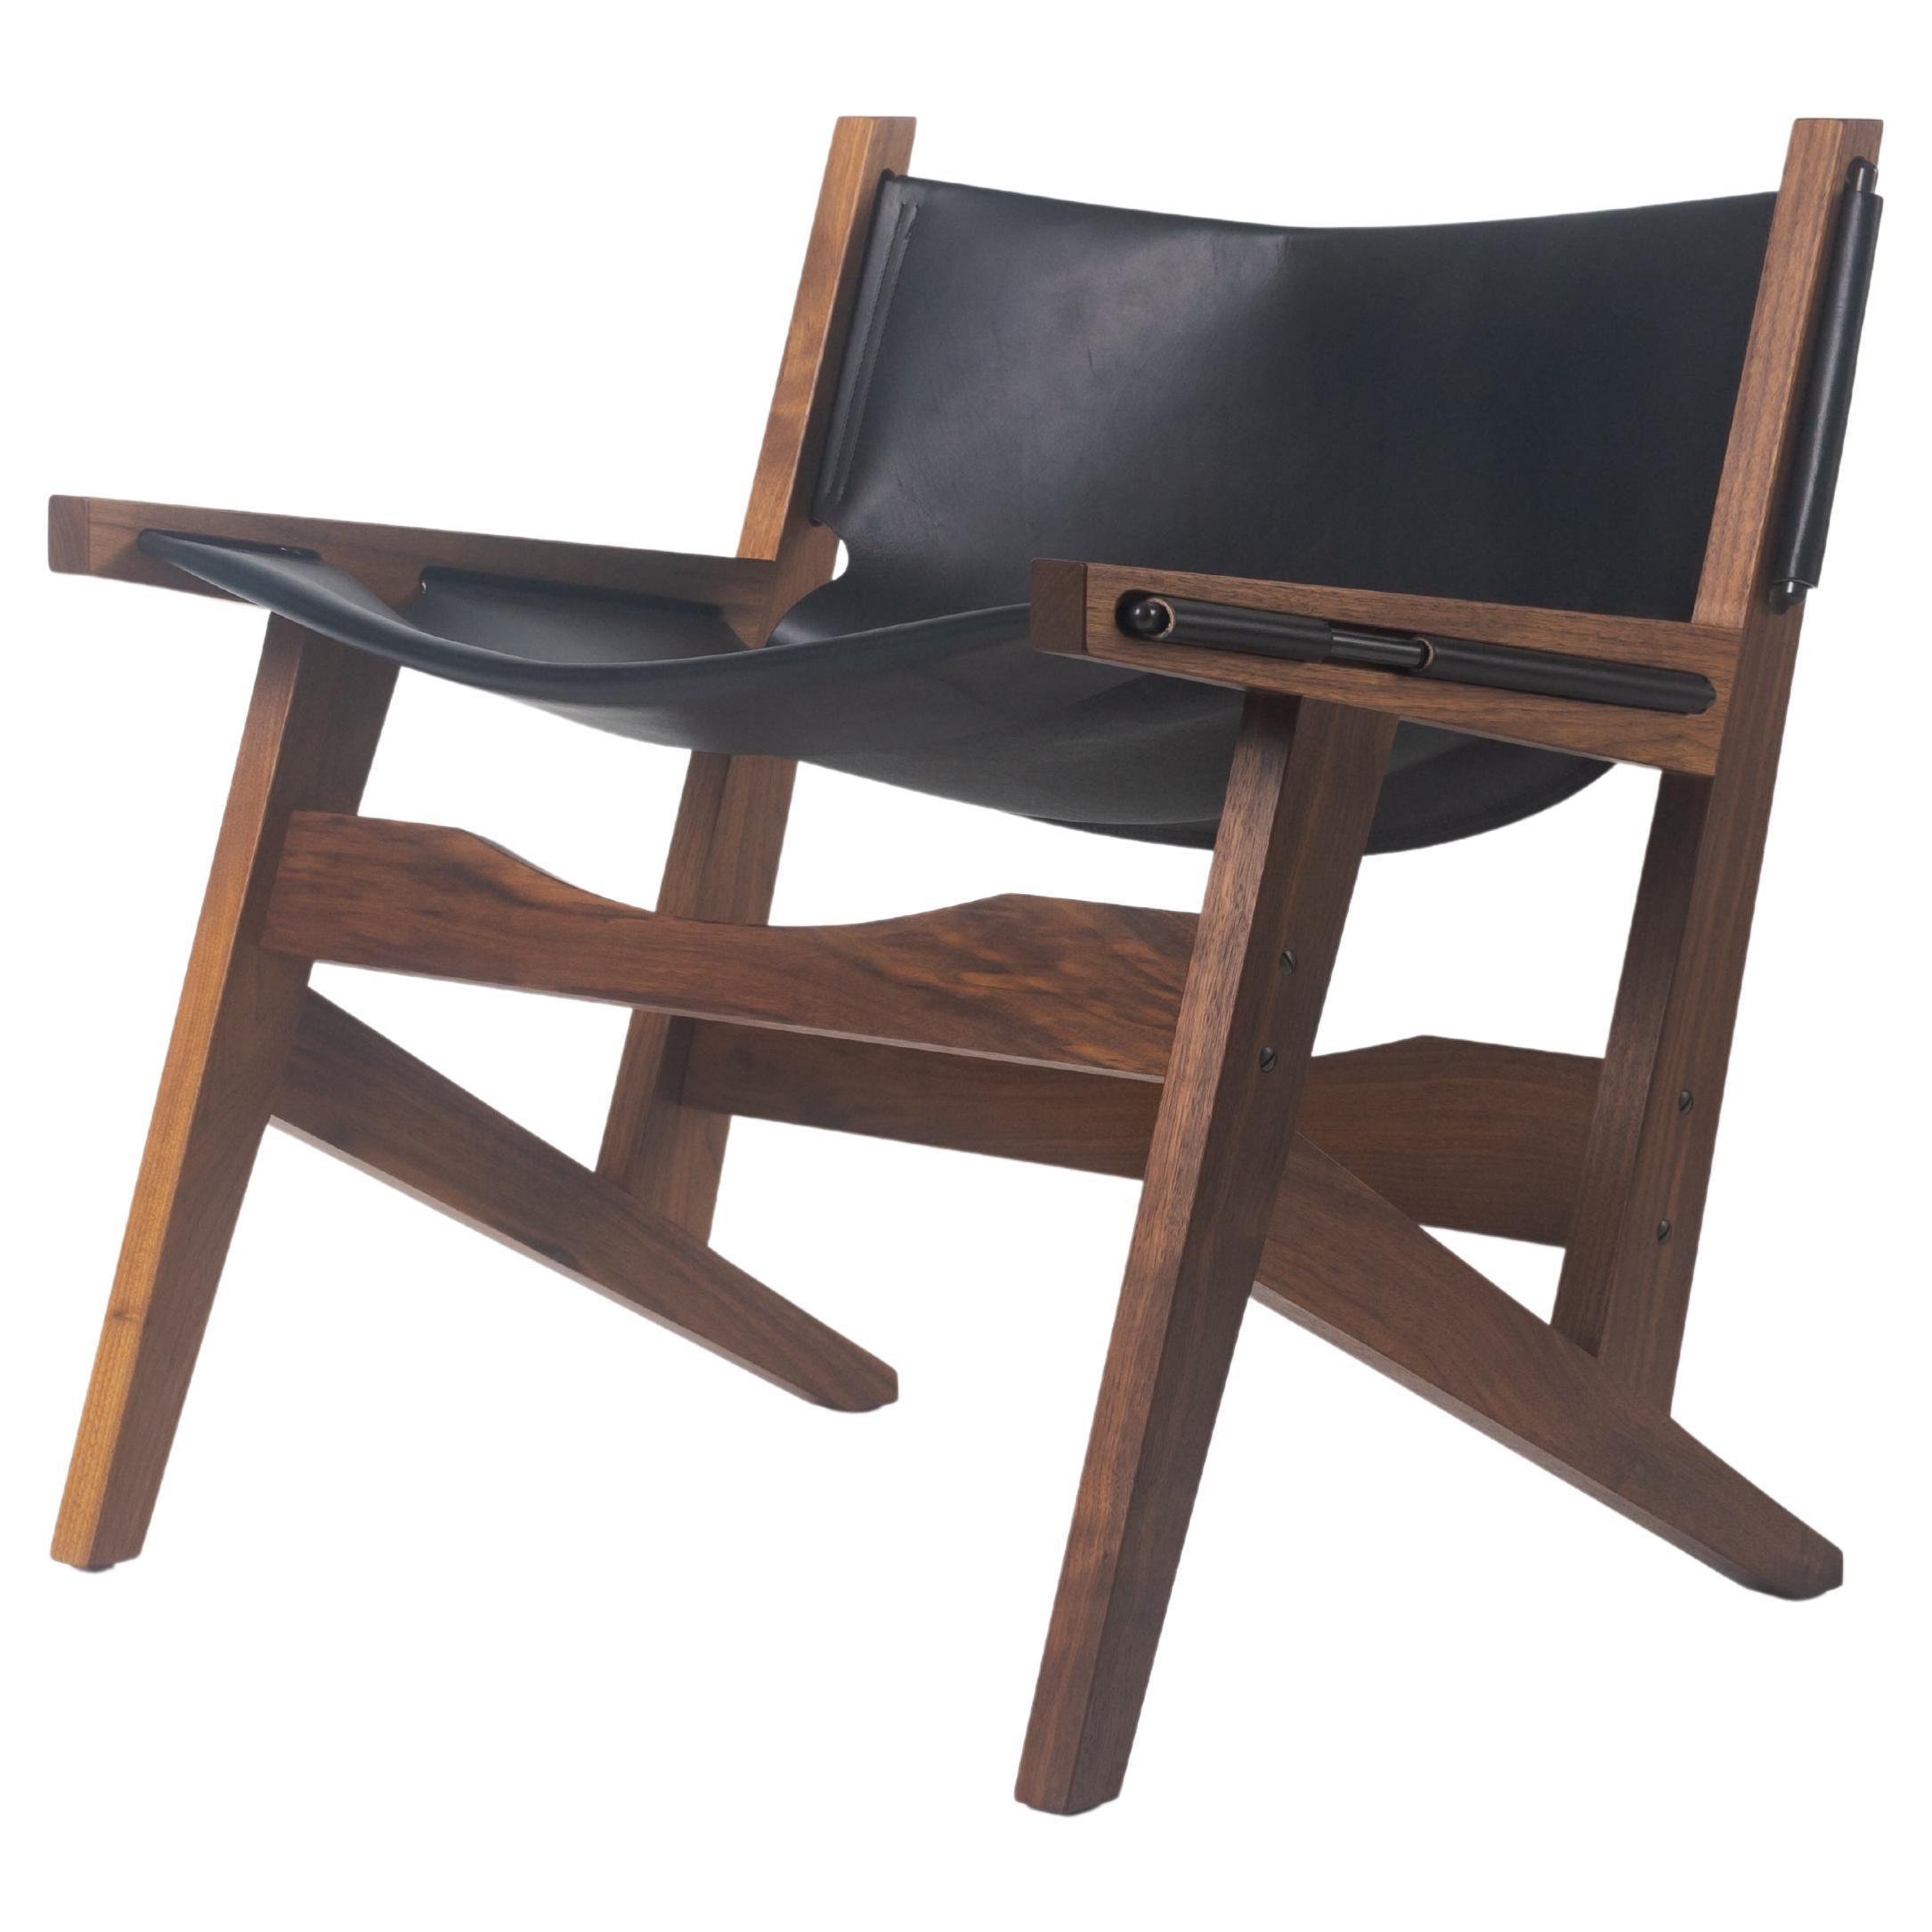 Peninsula Lounge Chair, Modern Wood and Leather Sling Chair with Brass Details